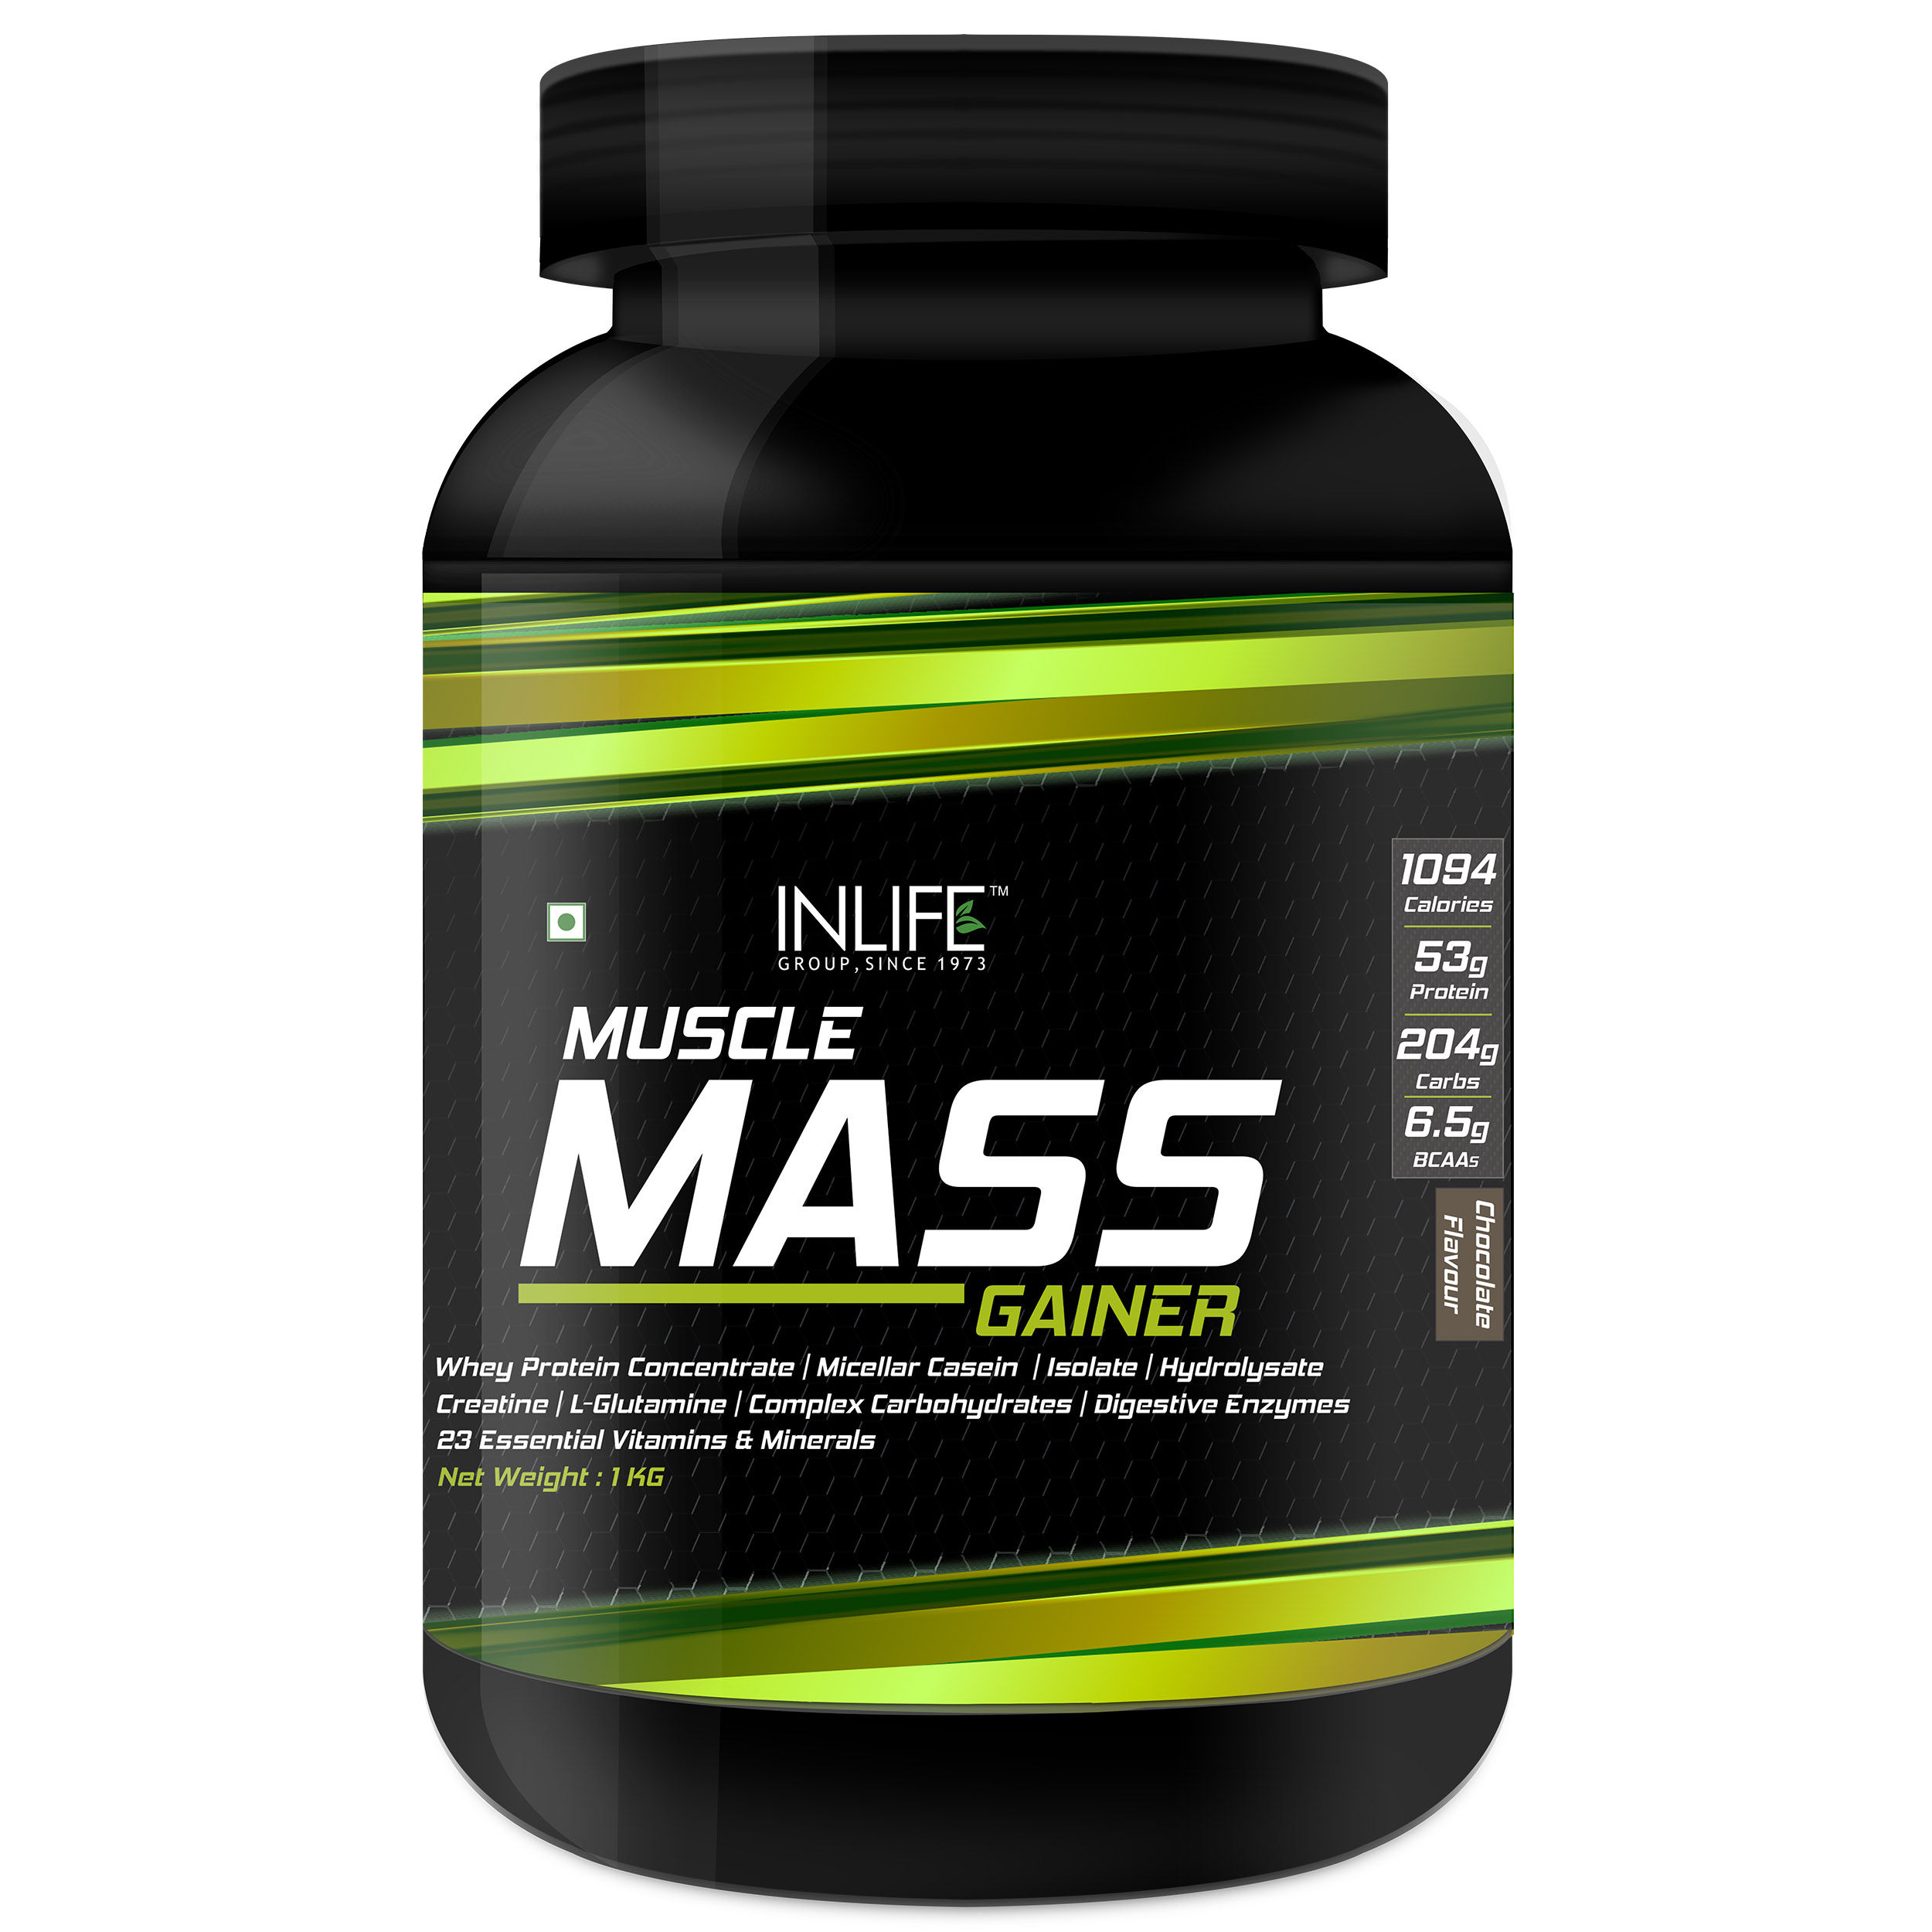 INLIFE Muscle Mass Gainer Chocolate Protein Powder with Whey Protein